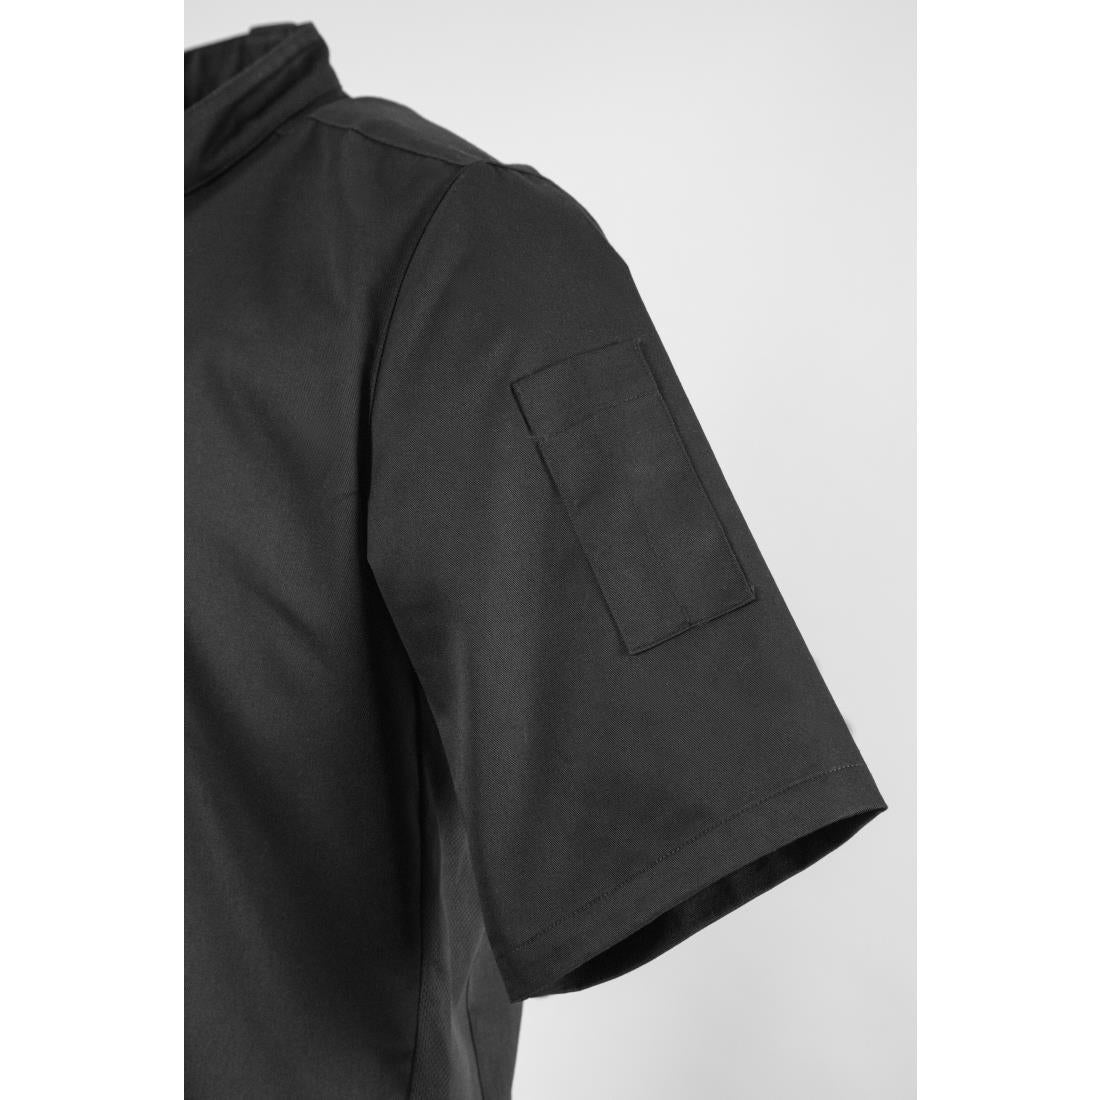 BB711-M Southside Band Collar Chefs Jacket Black Size M JD Catering Equipment Solutions Ltd